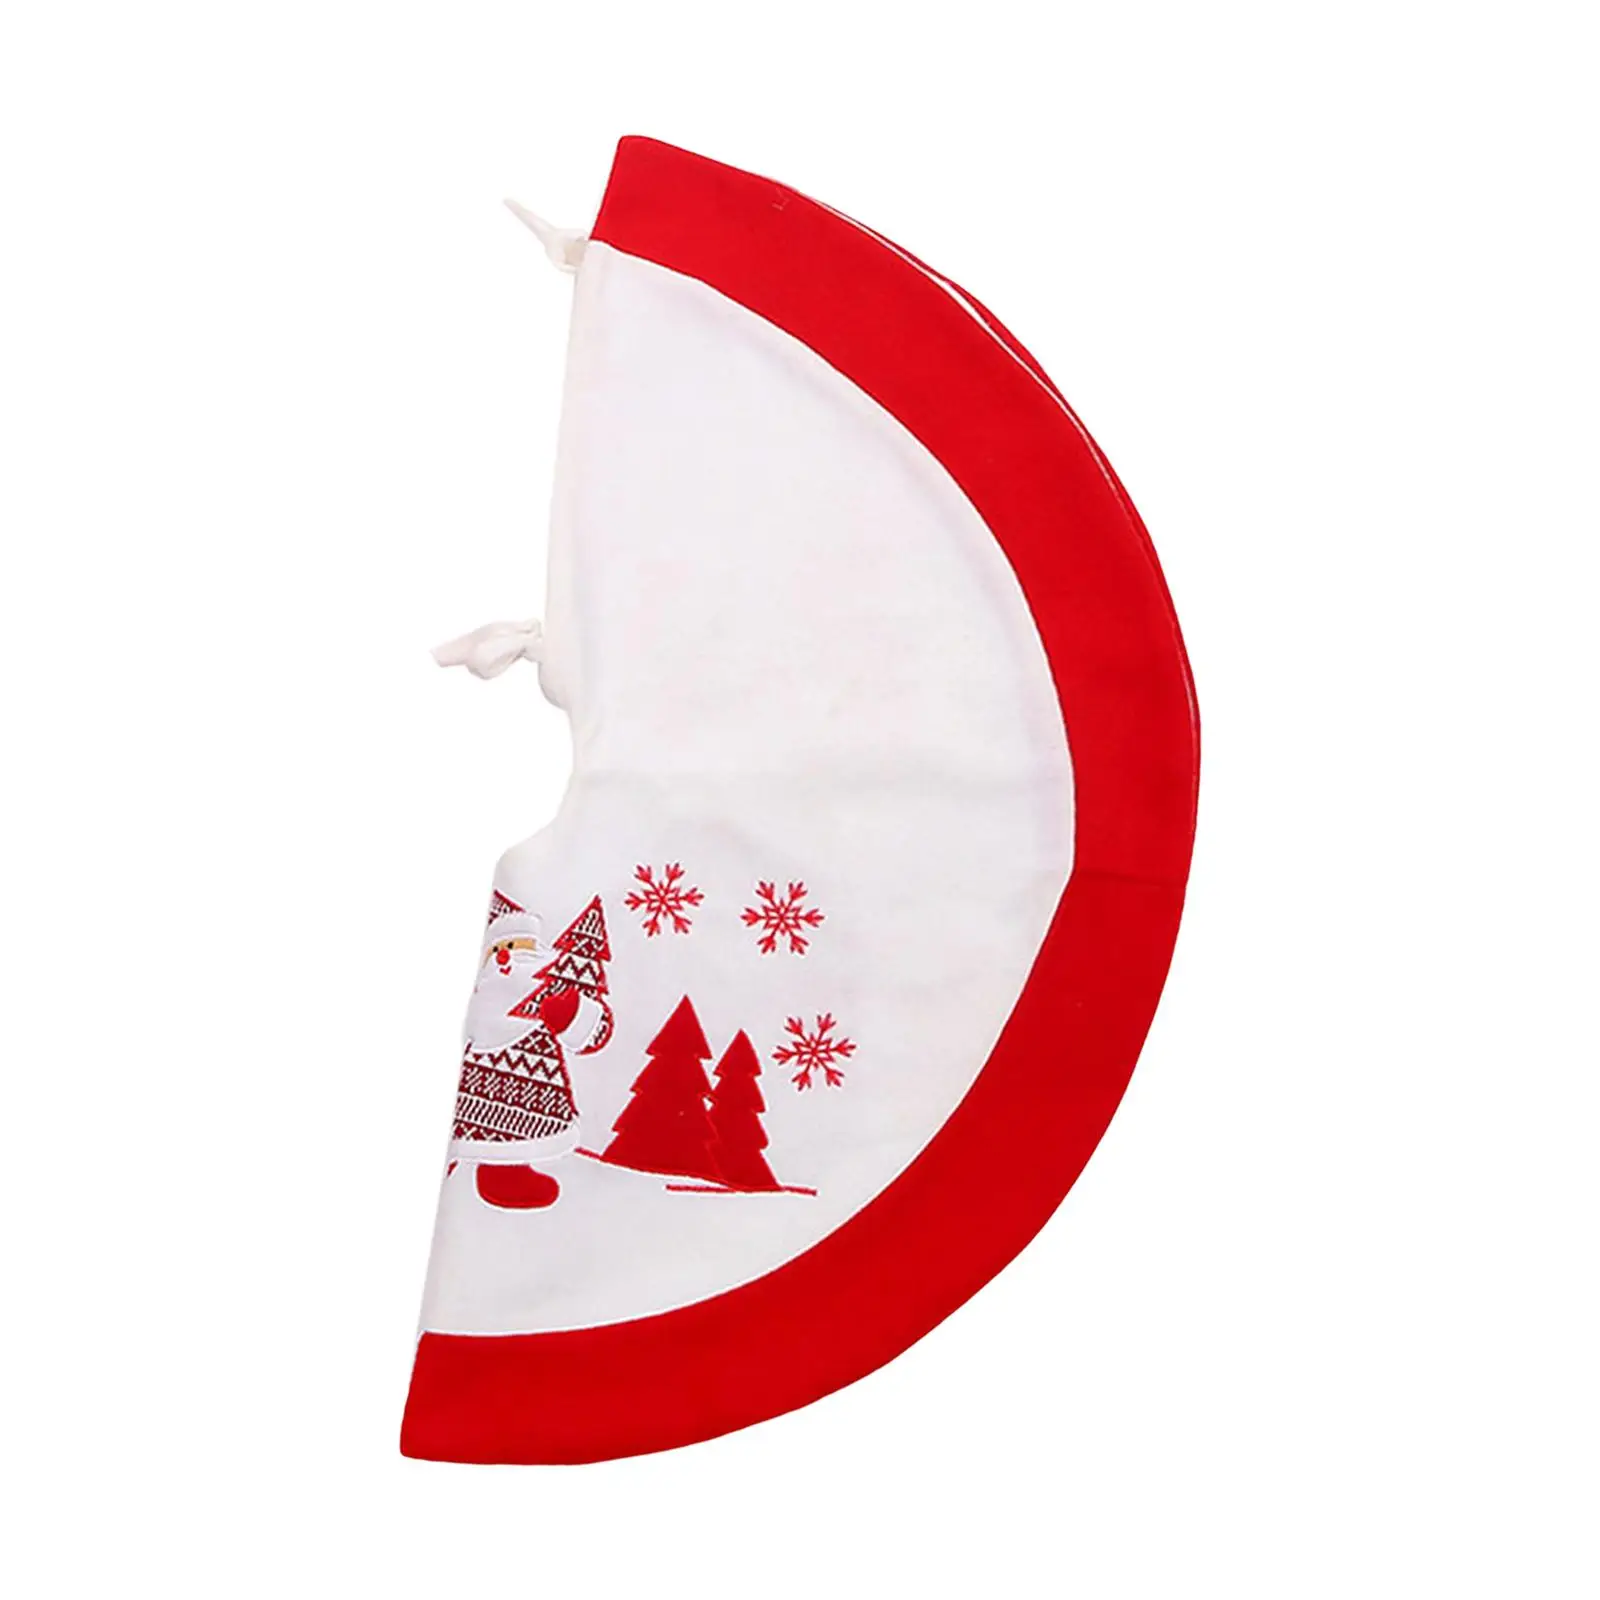 90cm Christmas Tree Skirt with Rope Vintage with Santa Claus Pattern Xmas Tree Base Cover for School outdoor Office Home